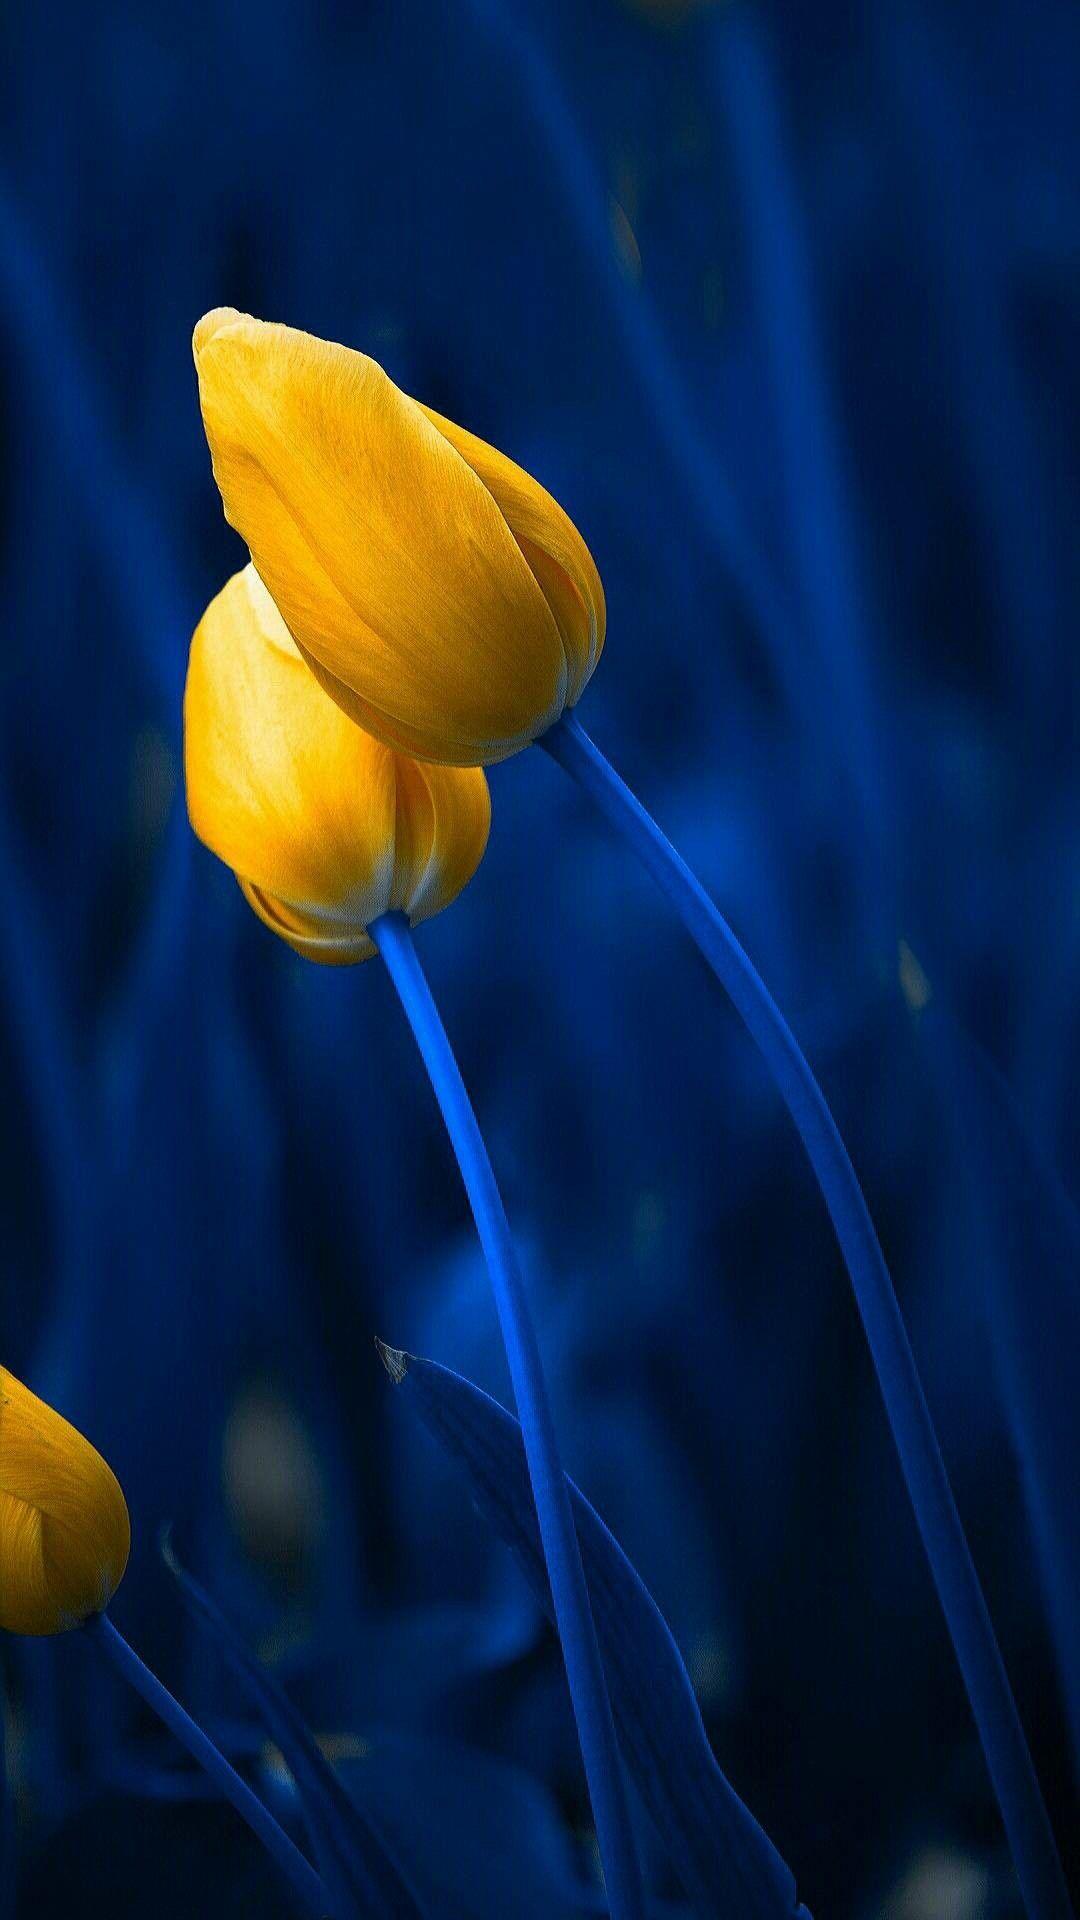 Download Blue And Yellow Flowers Wallpapers Top Free Blue And Yellow Flowers Backgrounds Wallpaperaccess